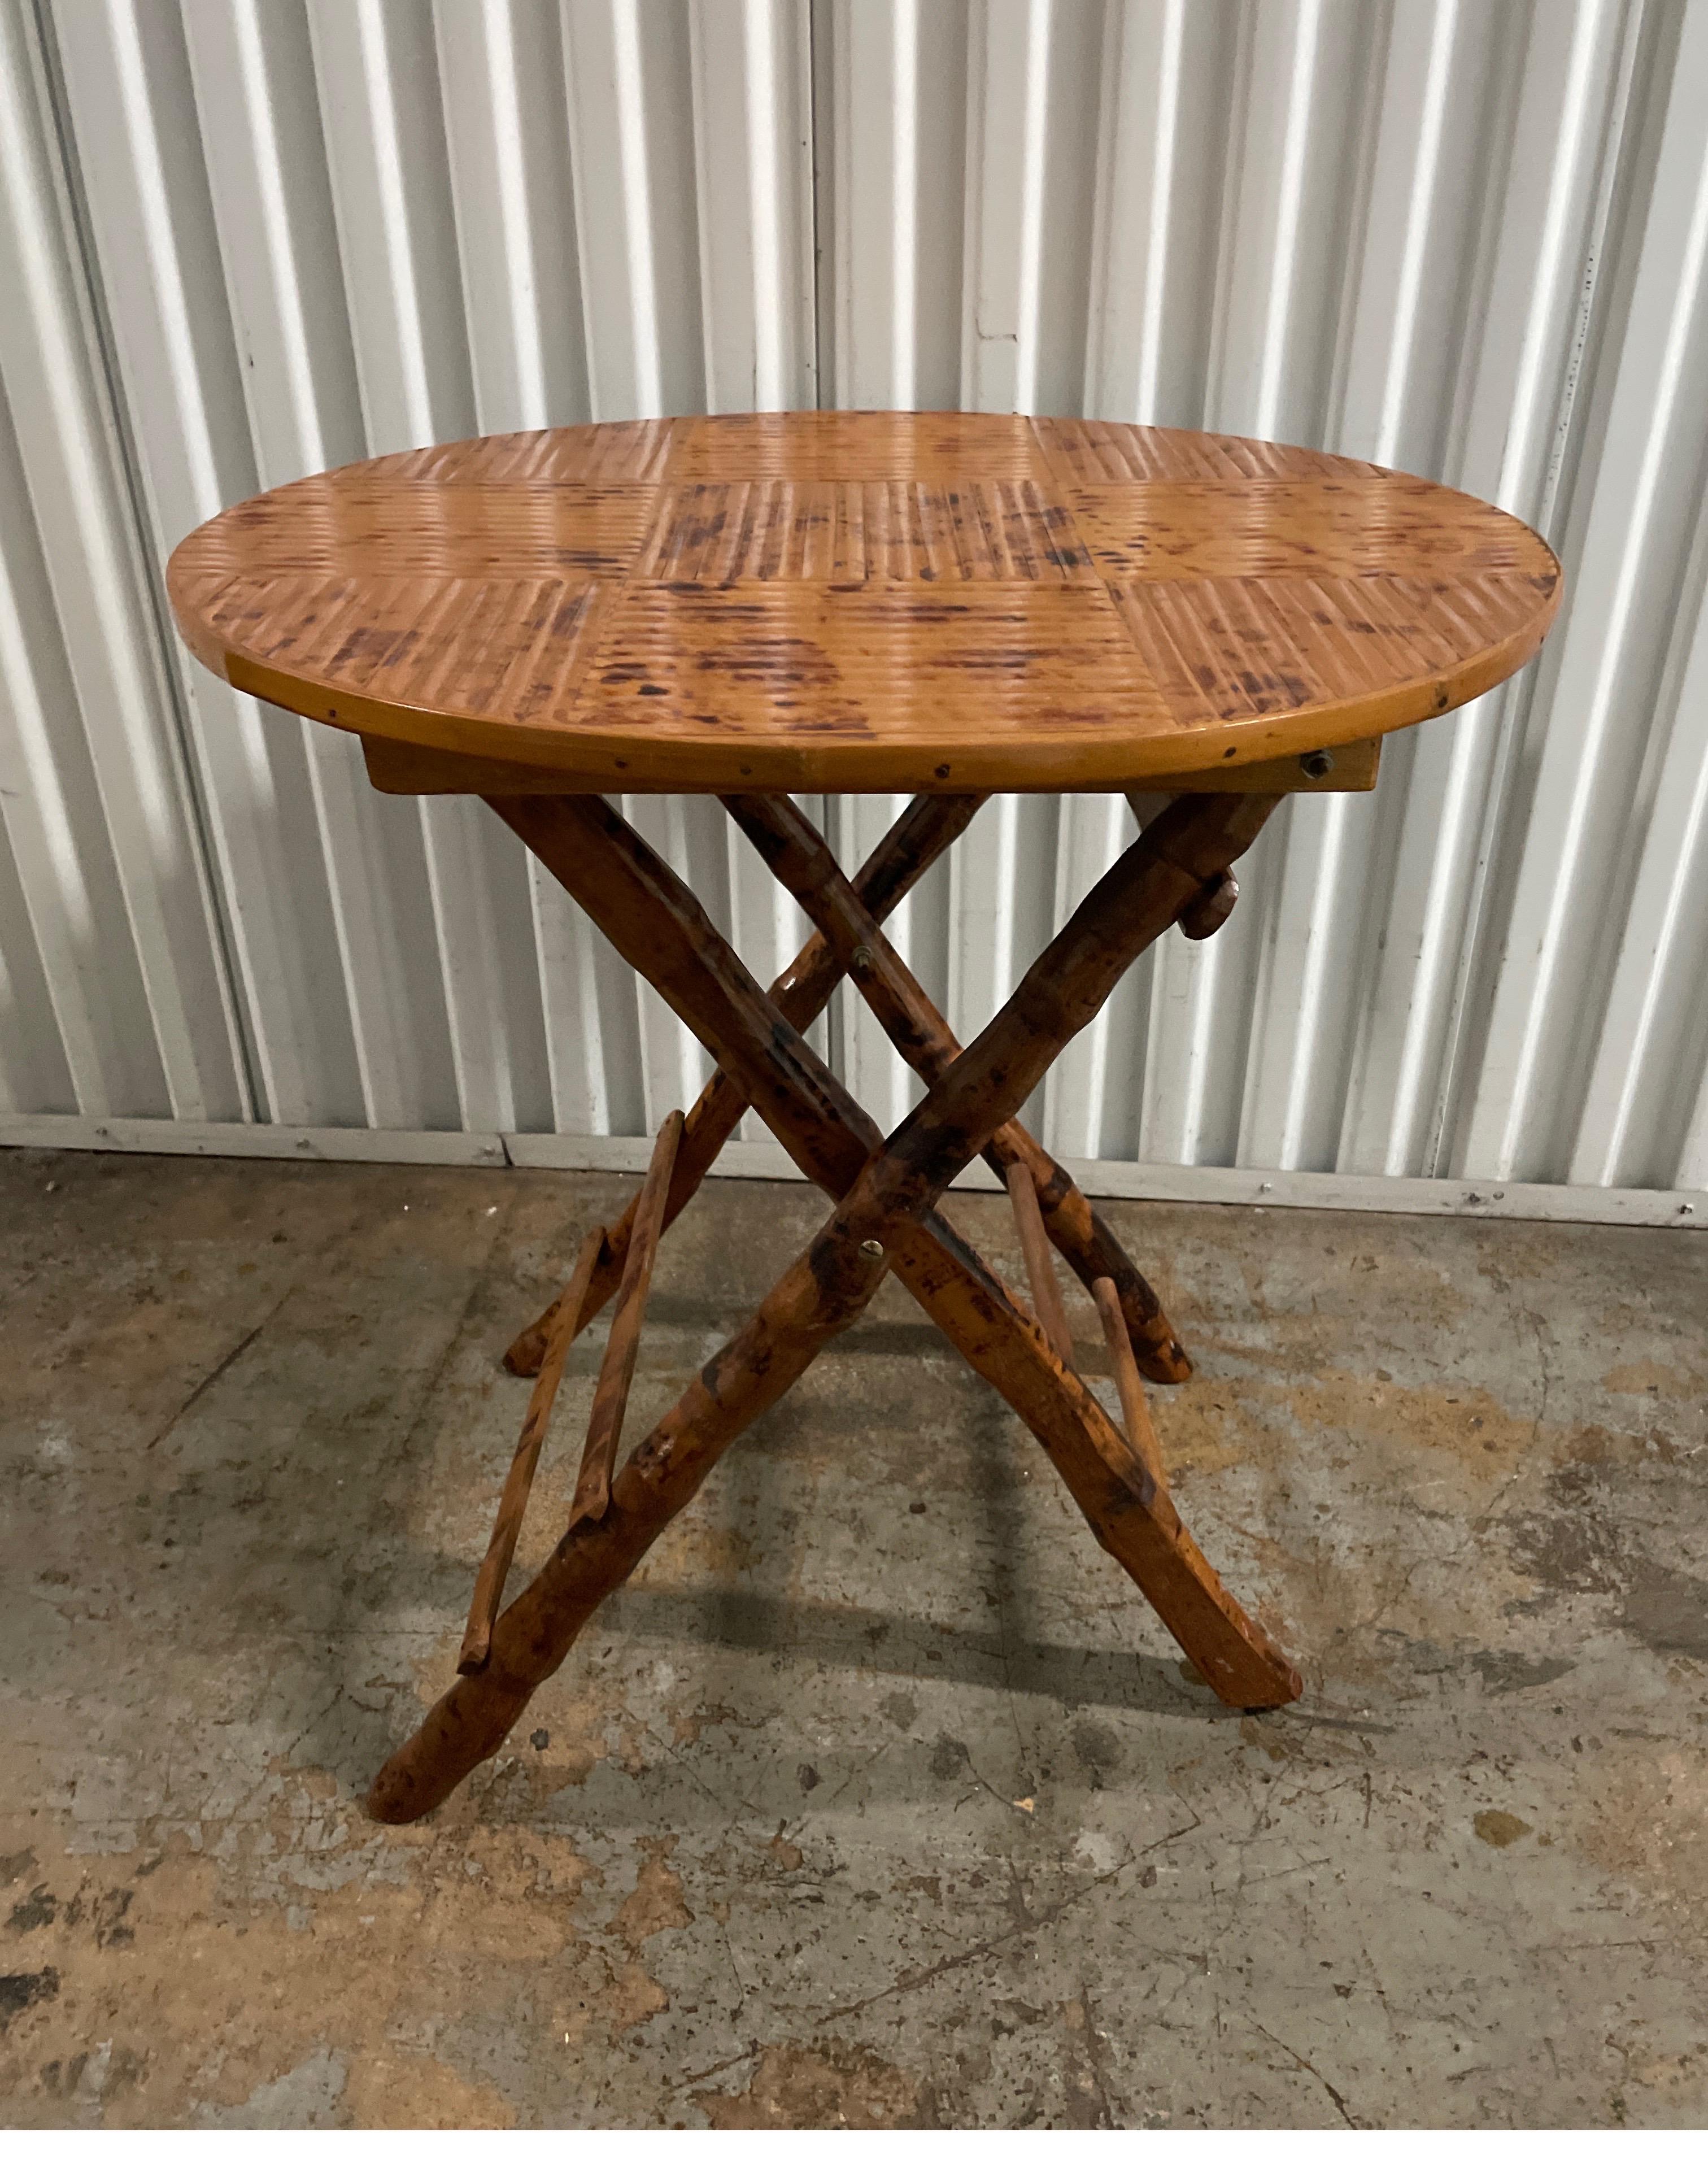 Folding burnt bamboo folding campaign table with split bamboo top. Great for end table, nightstand or for entertaining.